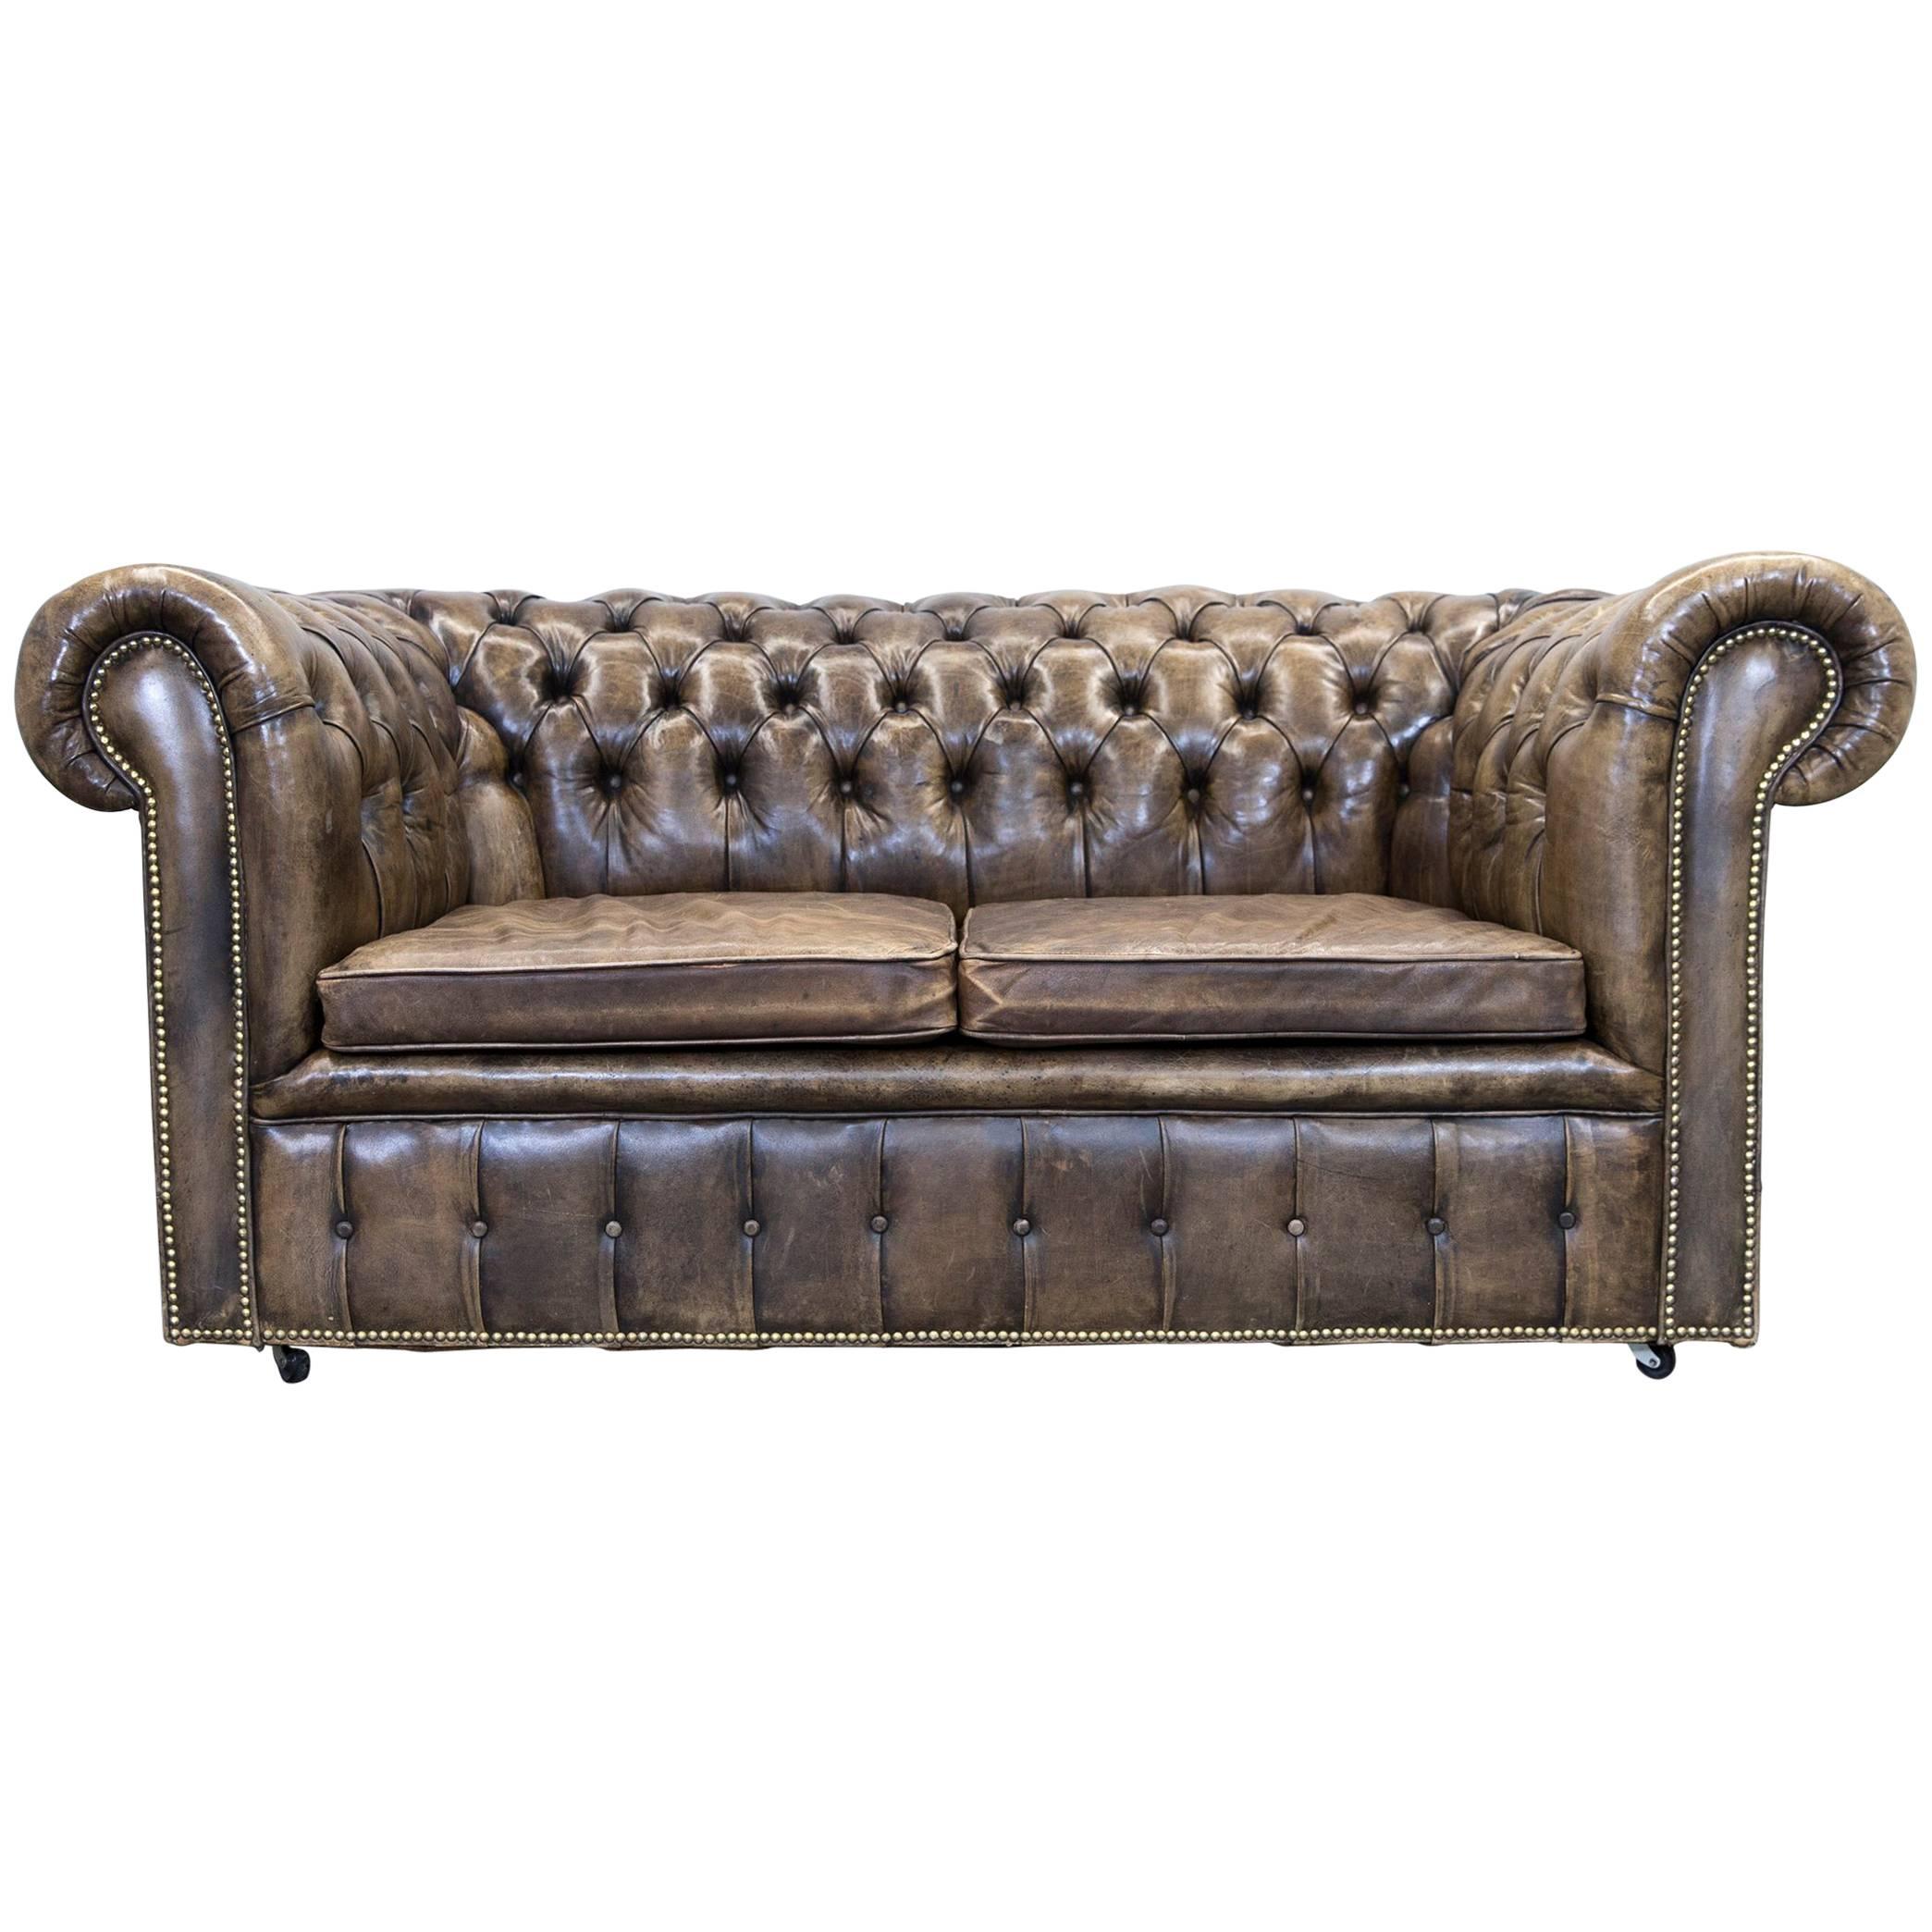 Chesterfield Leather Sofa Brown Two-Seat Couch Vintage Retro